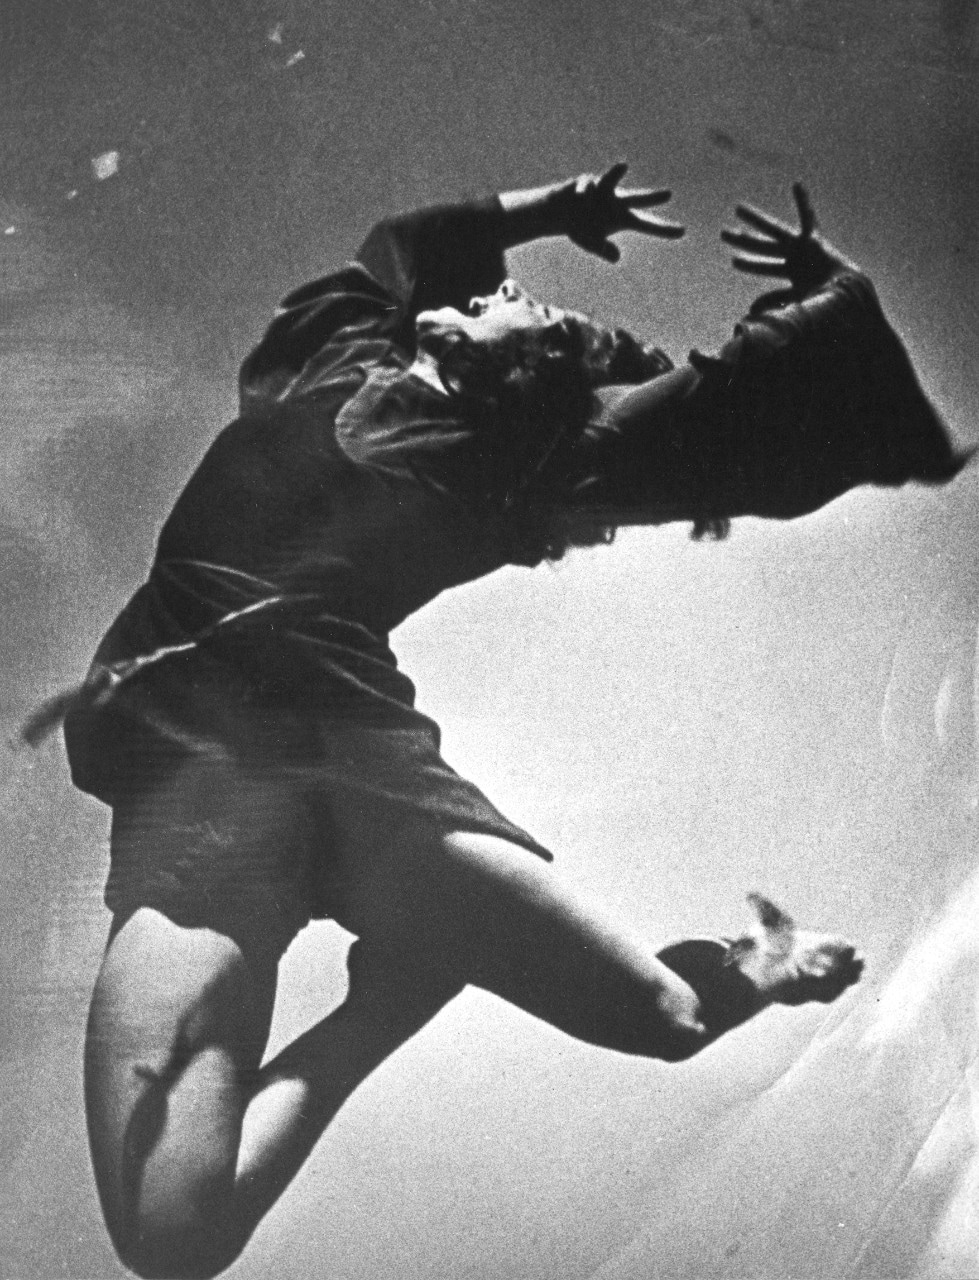 Dancer Shona Dunlop as Cain for the Bodenwieser Ballet’s production of Cain and Abel, produced and performed in the Verbrugghen Hall of the Sydney Conservatorium of Music in 1940.